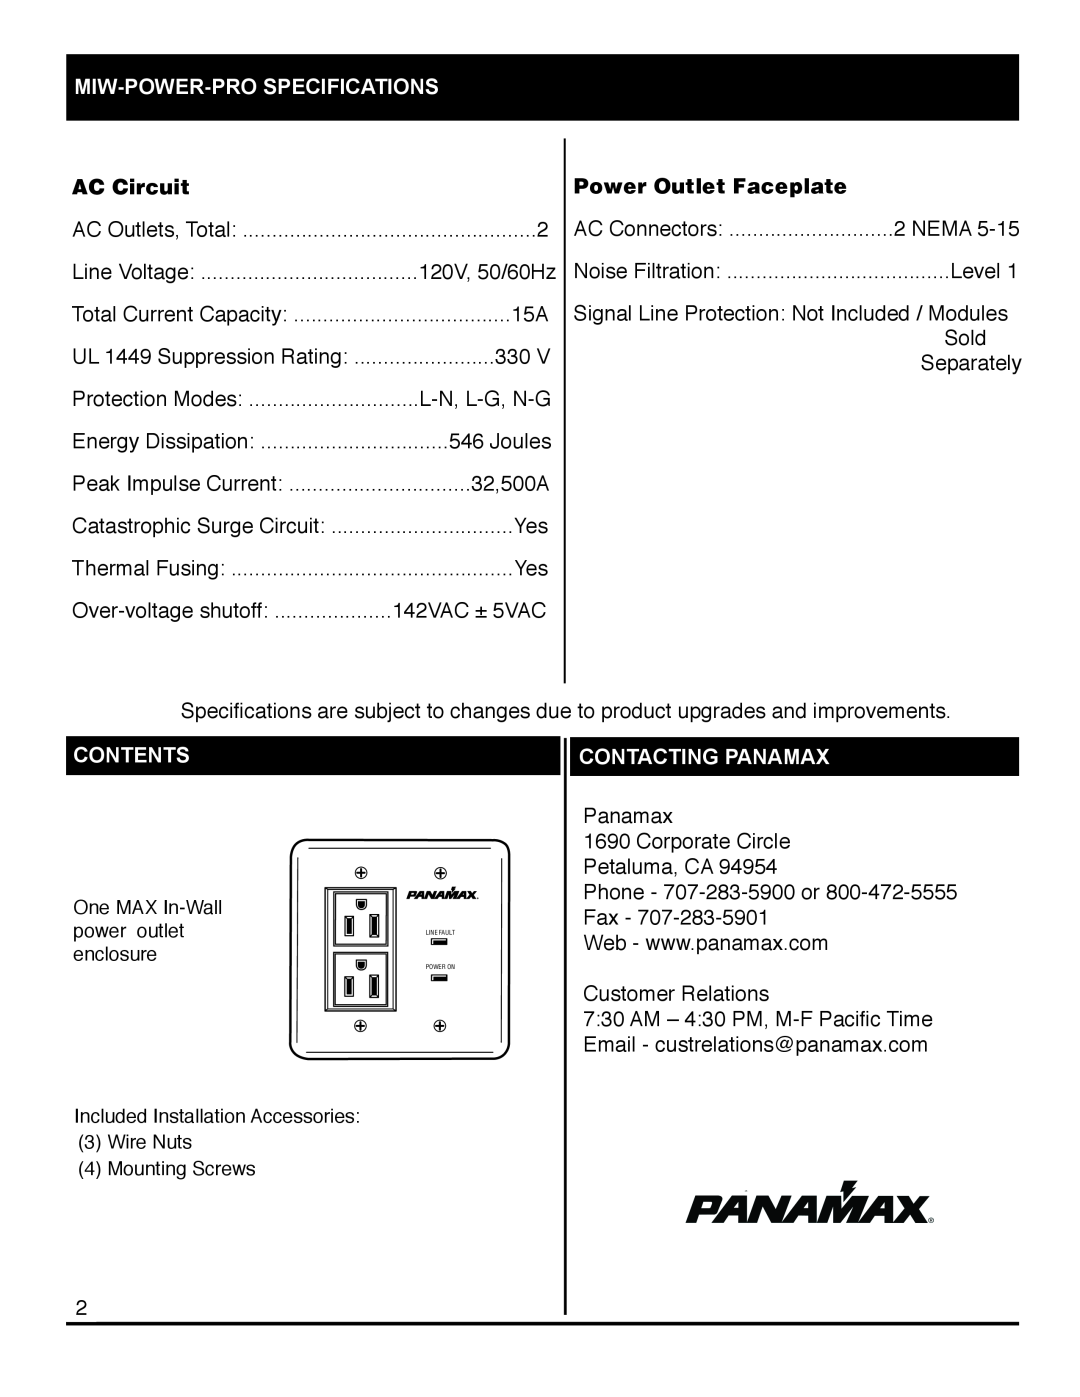 Panamax INS00809 Miw-Power-Pro Specifications, AC Circuit, Power Outlet Faceplate, Contents, Contacting Panamax 